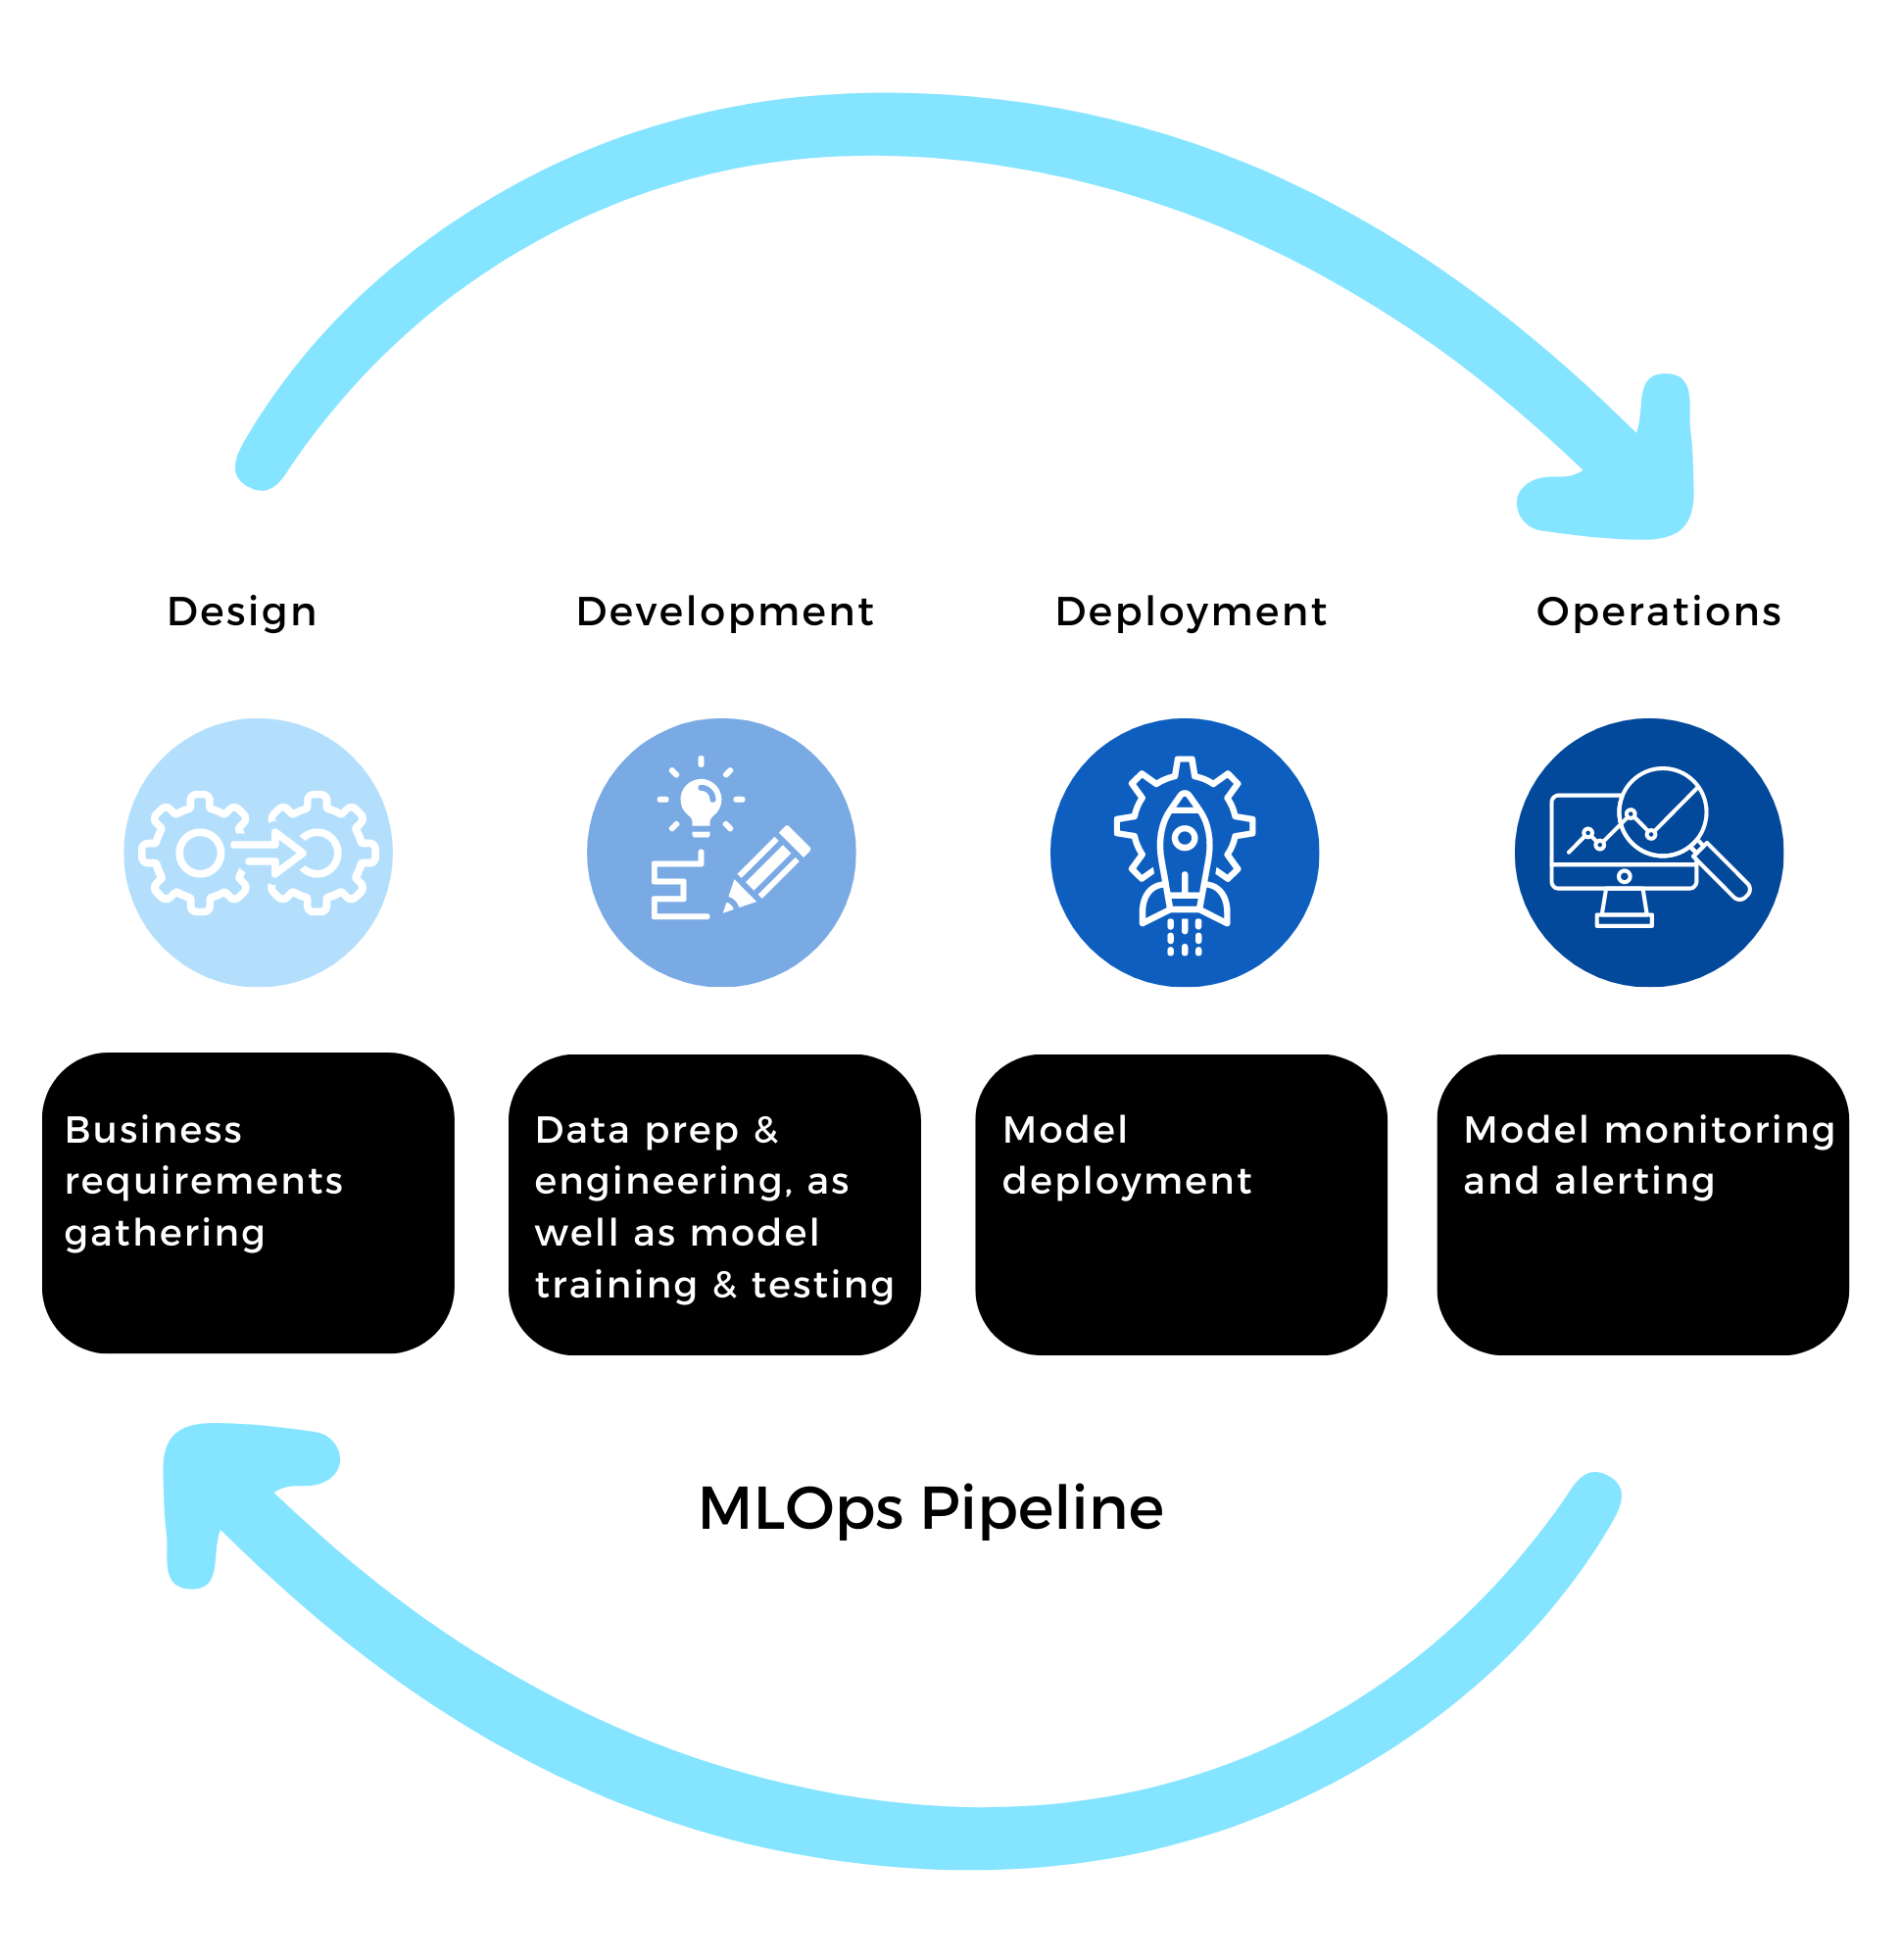 Four blue circles with white icons represent the components of an MLOps pipeline: design, development, deployment, operations. Below each icon is a black box with white text stating what each stage includes. Two light blue arrows surround the design in a circular motion. 